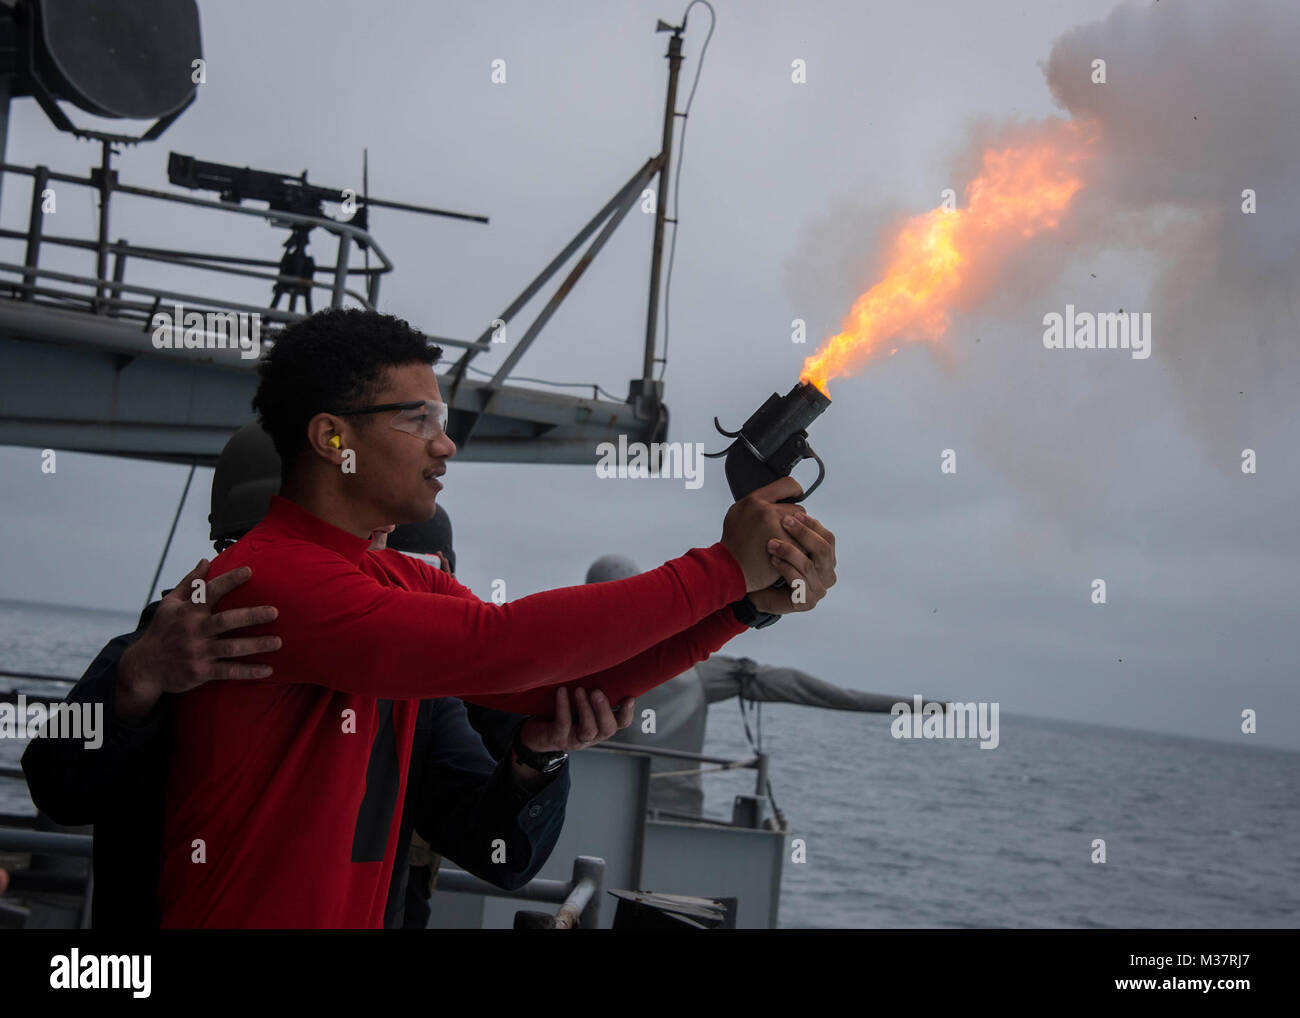 170605-N-LK571-833  PACIFIC OCEAN (June 5, 2017) Gunner’s Mate 2nd Class Deion Mahone, from  Indianapolis, fires a flare gun during a live-fire exercise in the western Pacific aboard the Nimitz-class aircraft carrier USS Carl Vinson (CVN 70). The U.S. Navy has patrolled the Indo-Asia-Pacific routinely for more than 70 years promoting regional peace and security. (U.S. Navy photo by Mass Communication Specialist 3rd Class Matthew Granito/Released) USS Carl Vinson Sailors conduct a live-fire exercise in the Western Pacific by #PACOM Stock Photo